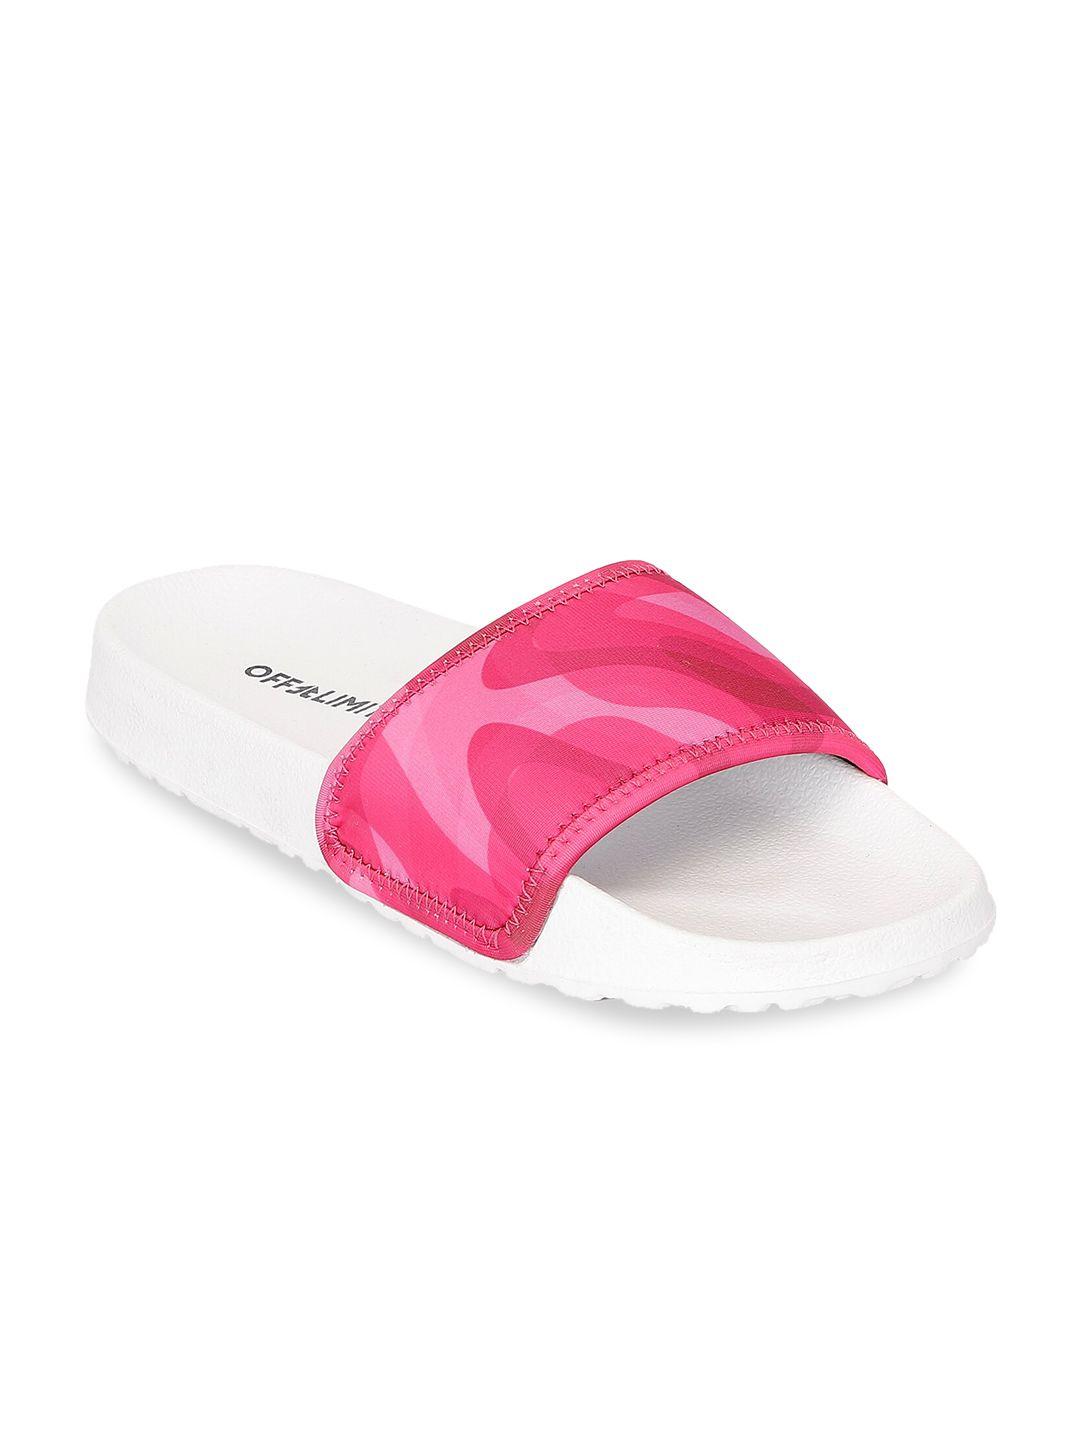 off-limits-women-pink-&-white-printed-sliders